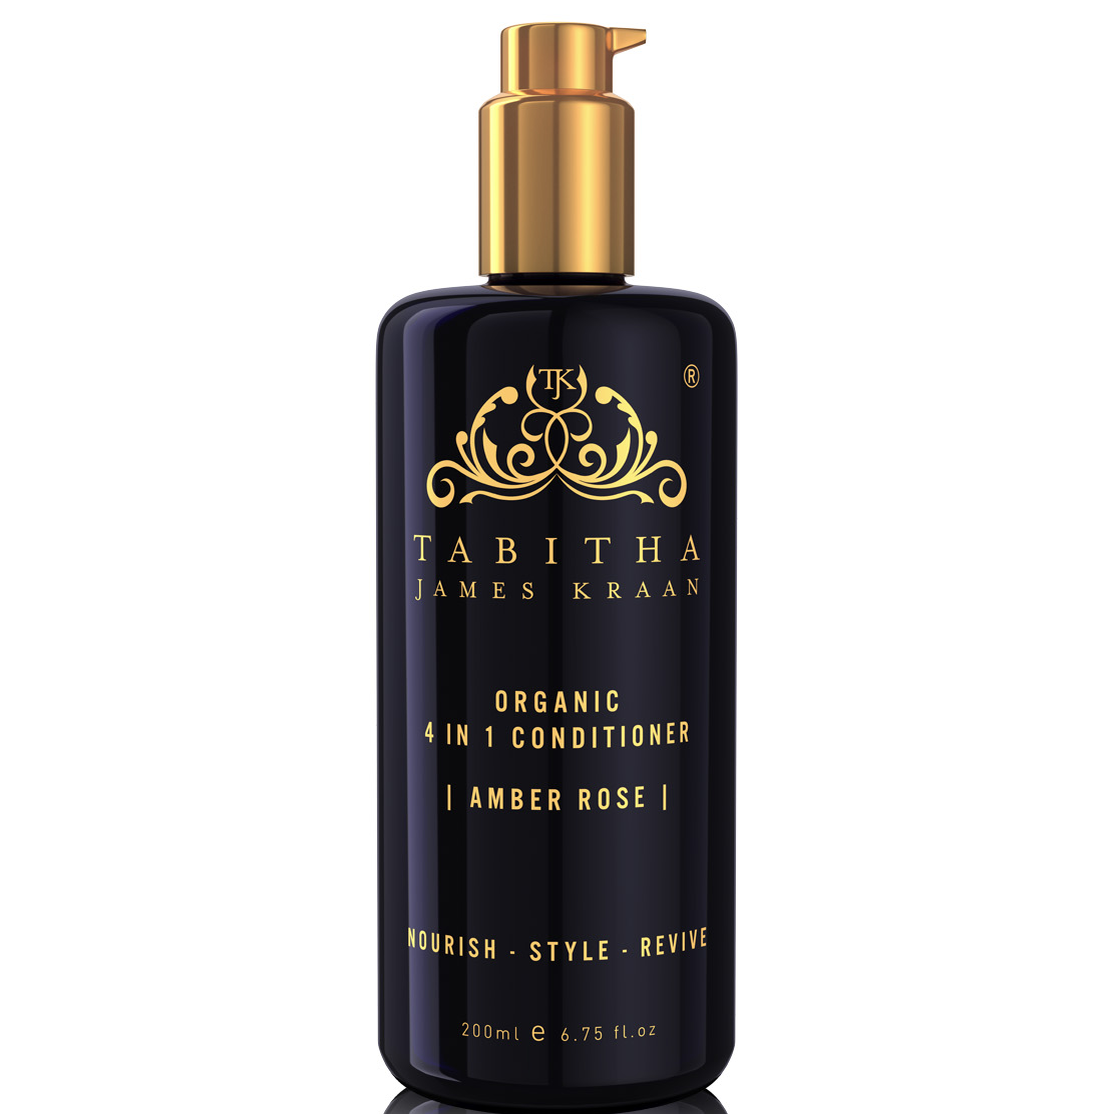 Tabitha James Kraan Luxury Edition Amber Rose 4-in-1 Conditioner